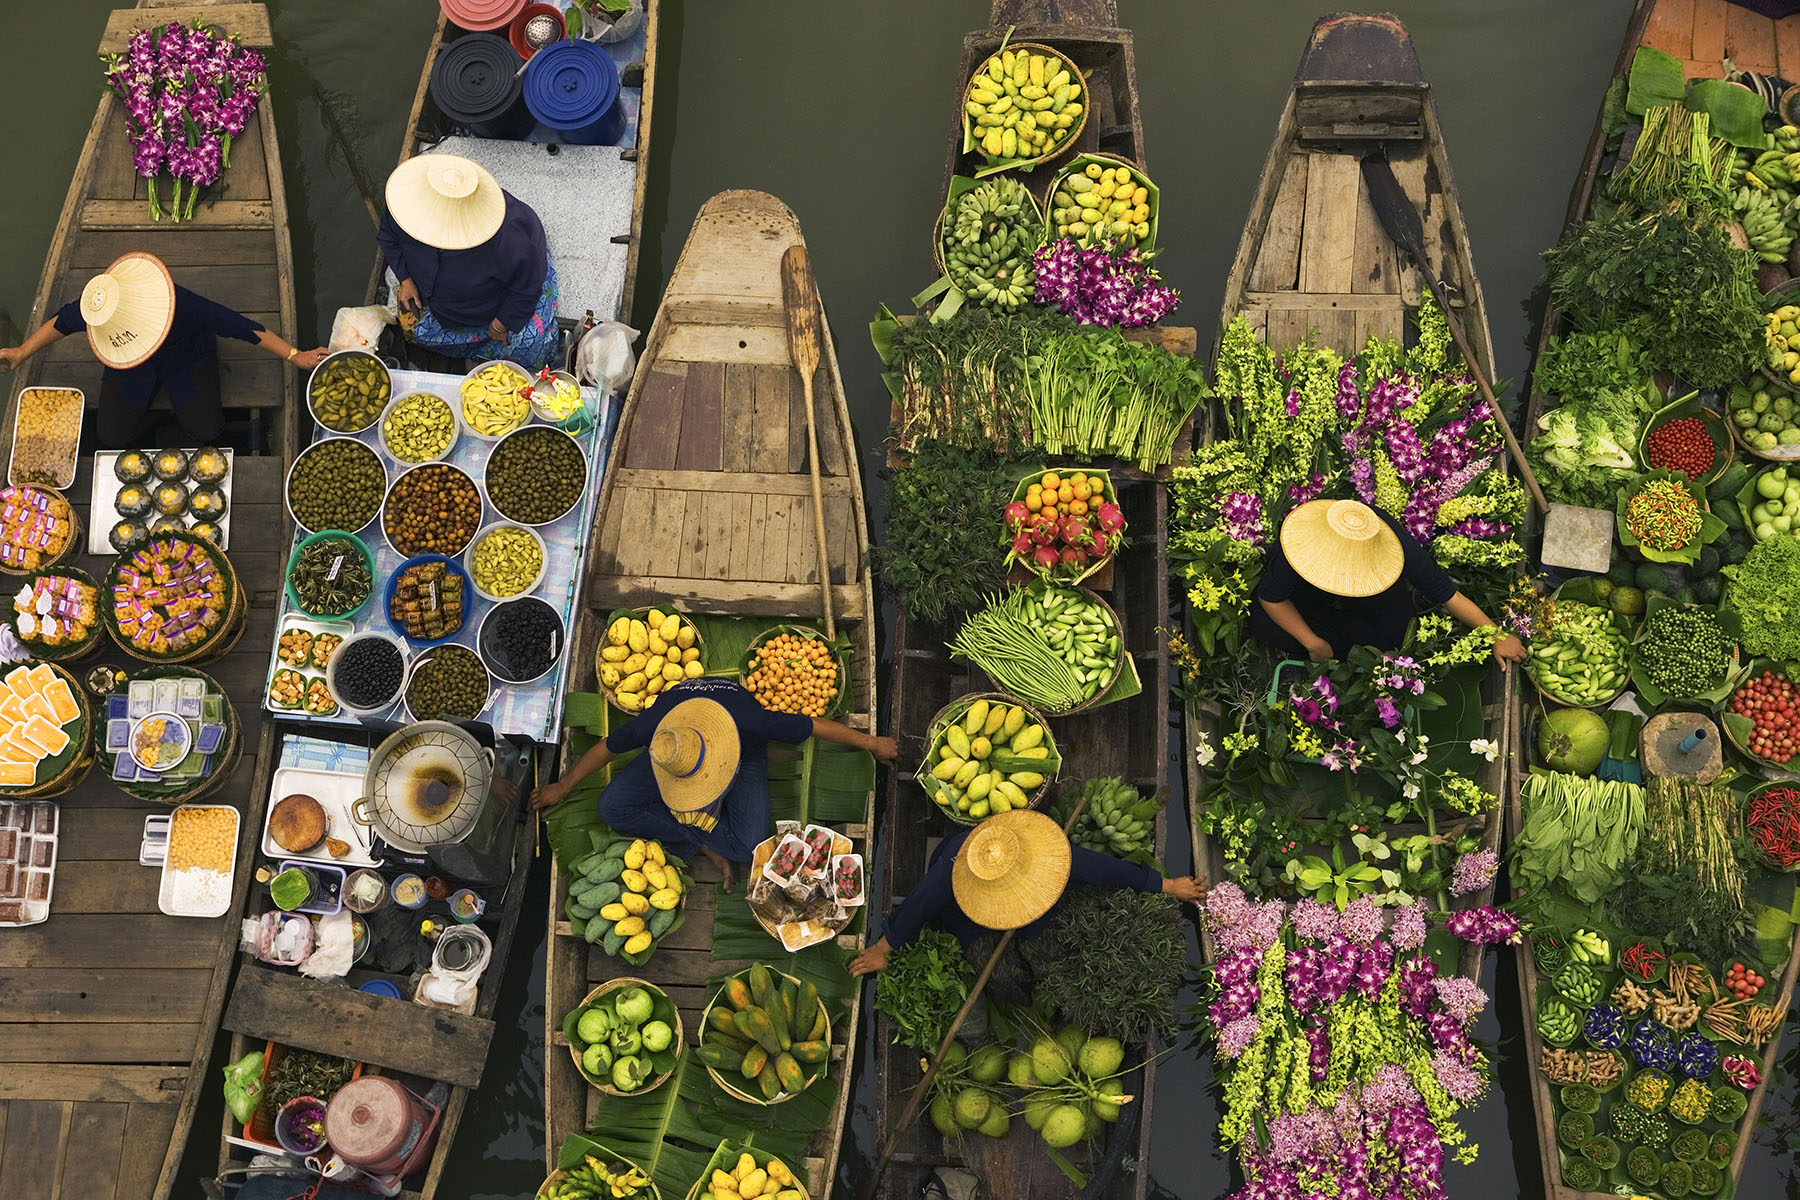 A floating market on a canal in Thailand, with boats laden with fresh produce, vegetables and fruit.